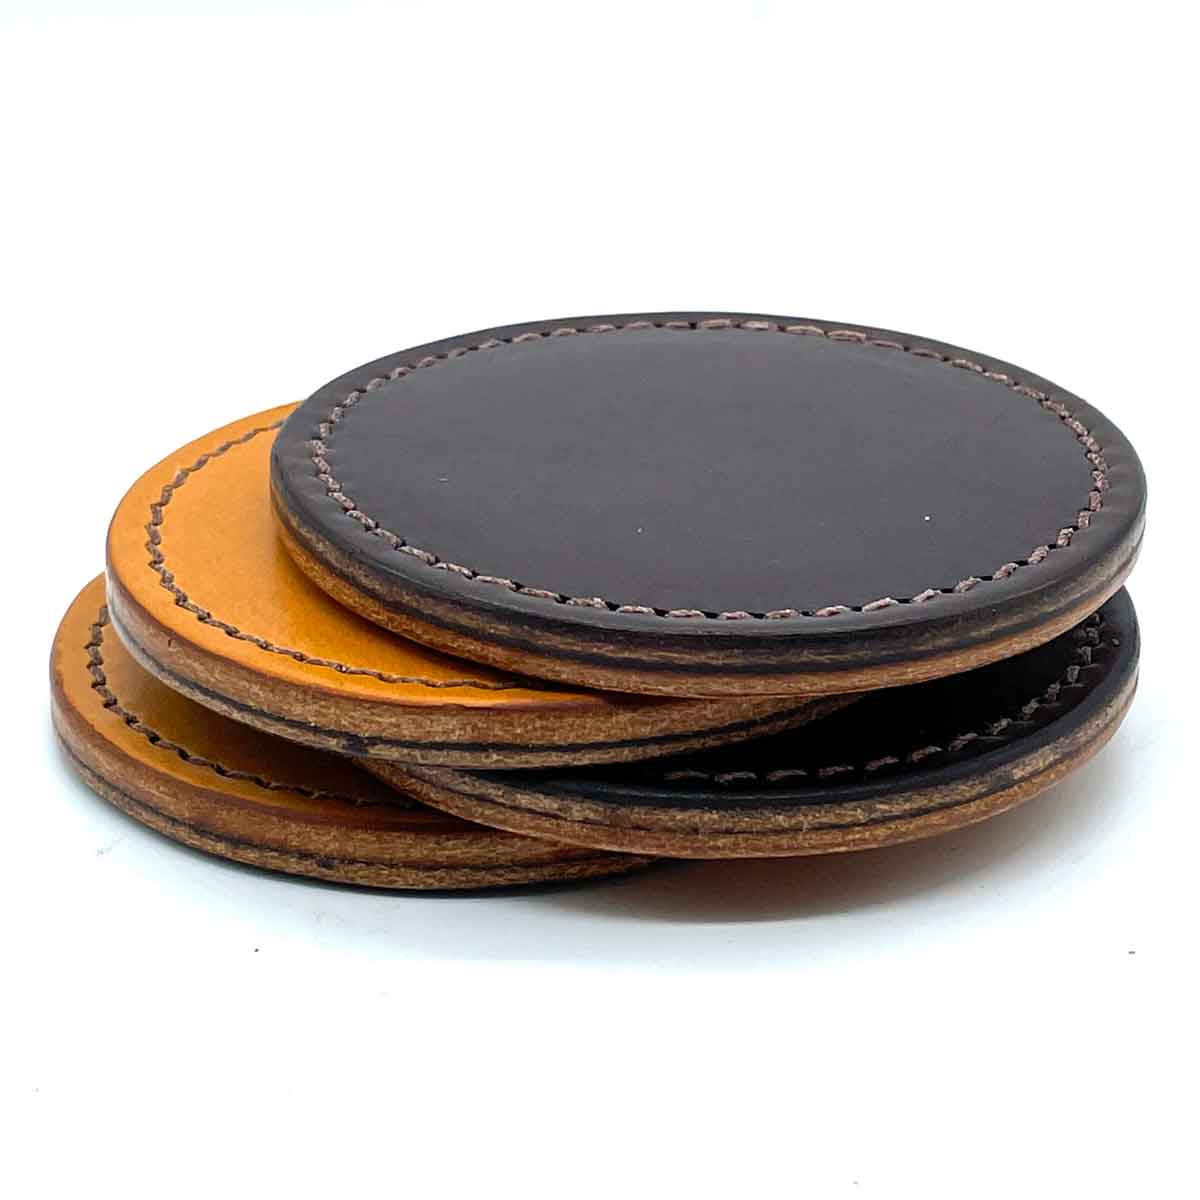 Branded Leather Coasters